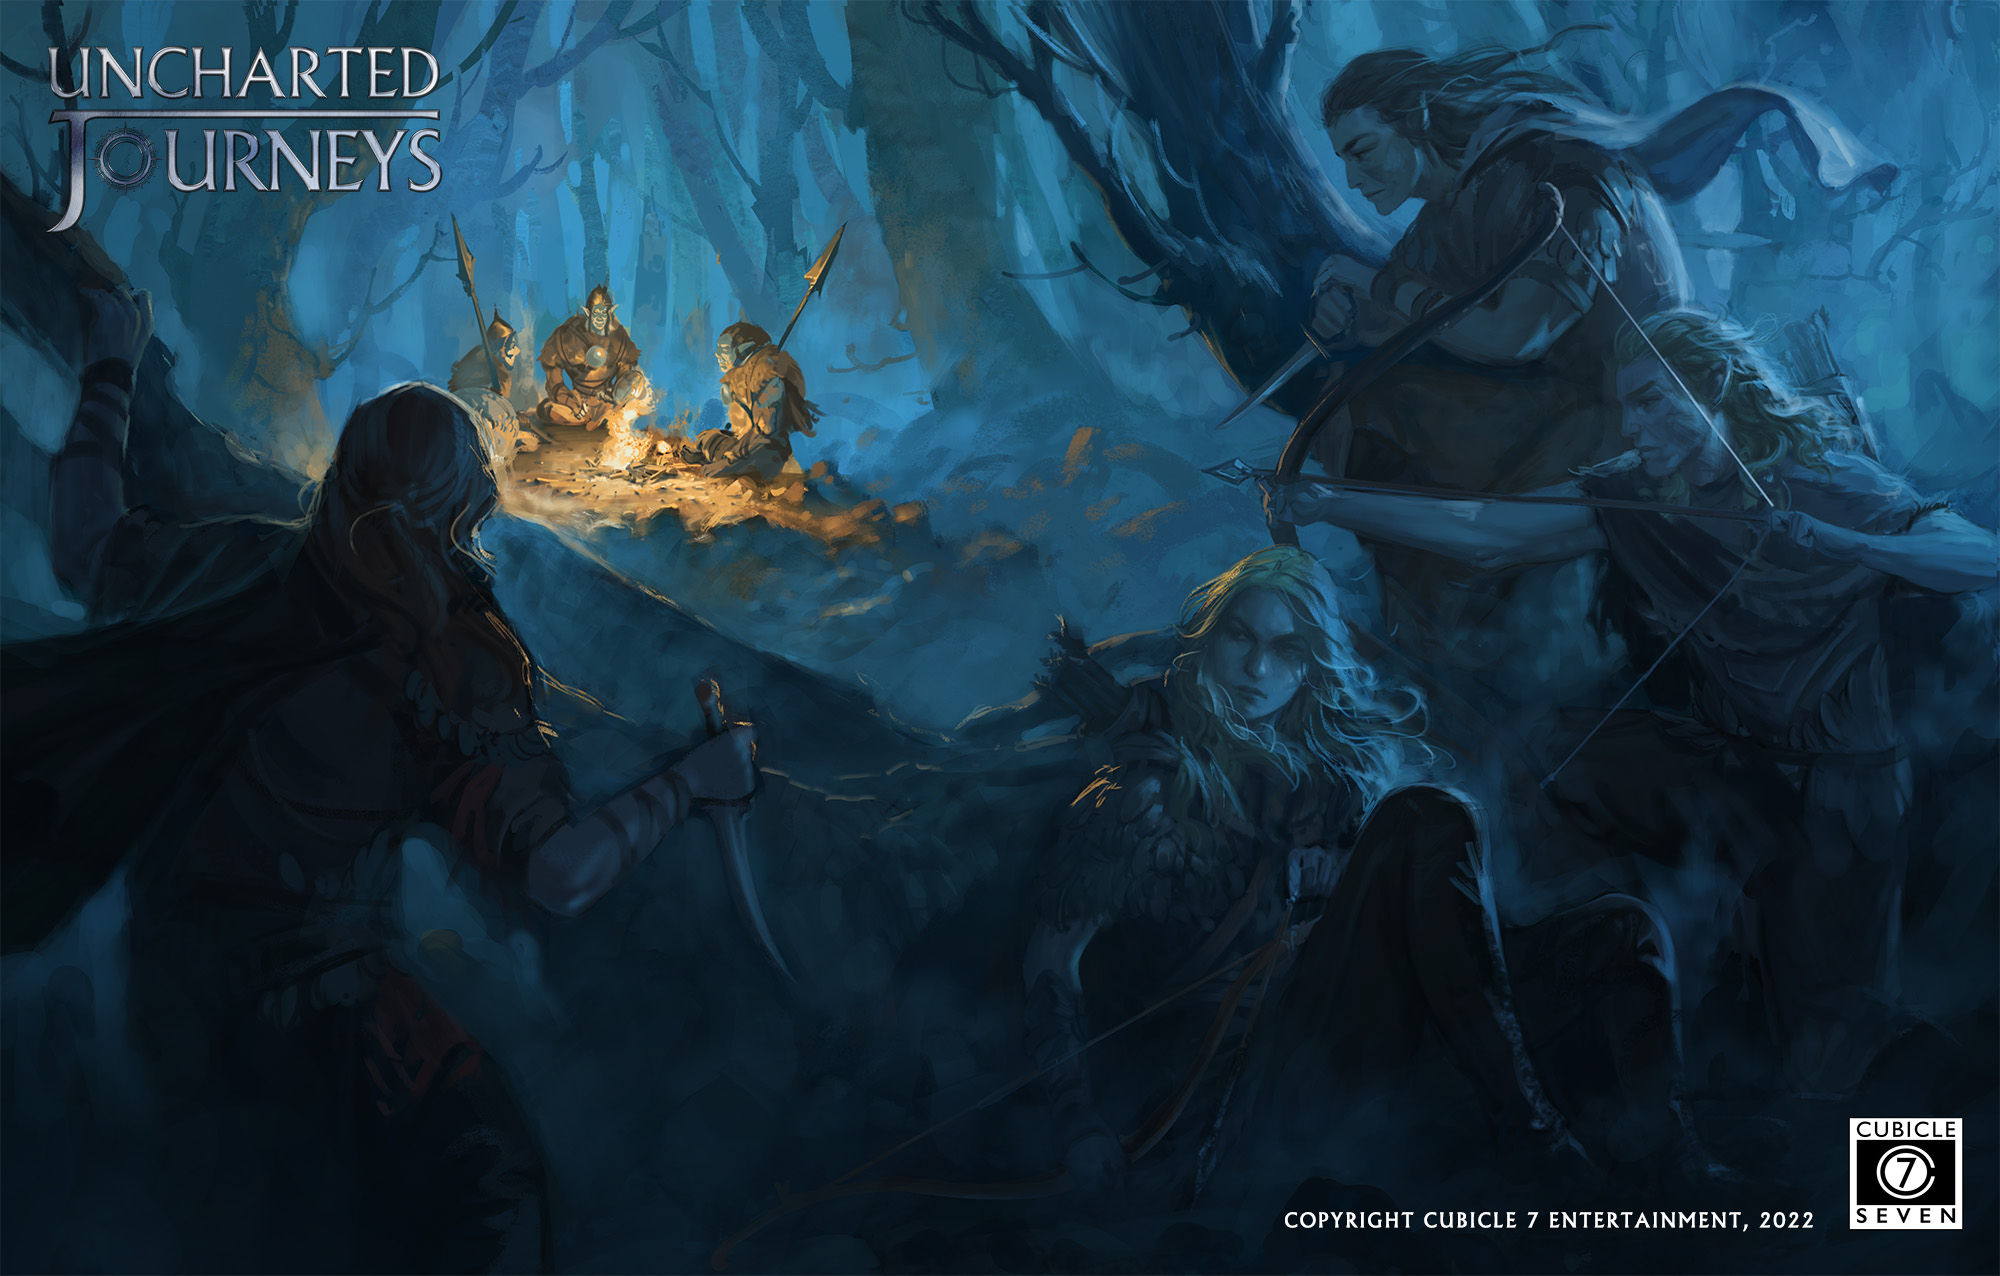 Uncharted Journeys Sentry Art - Cubicle 7